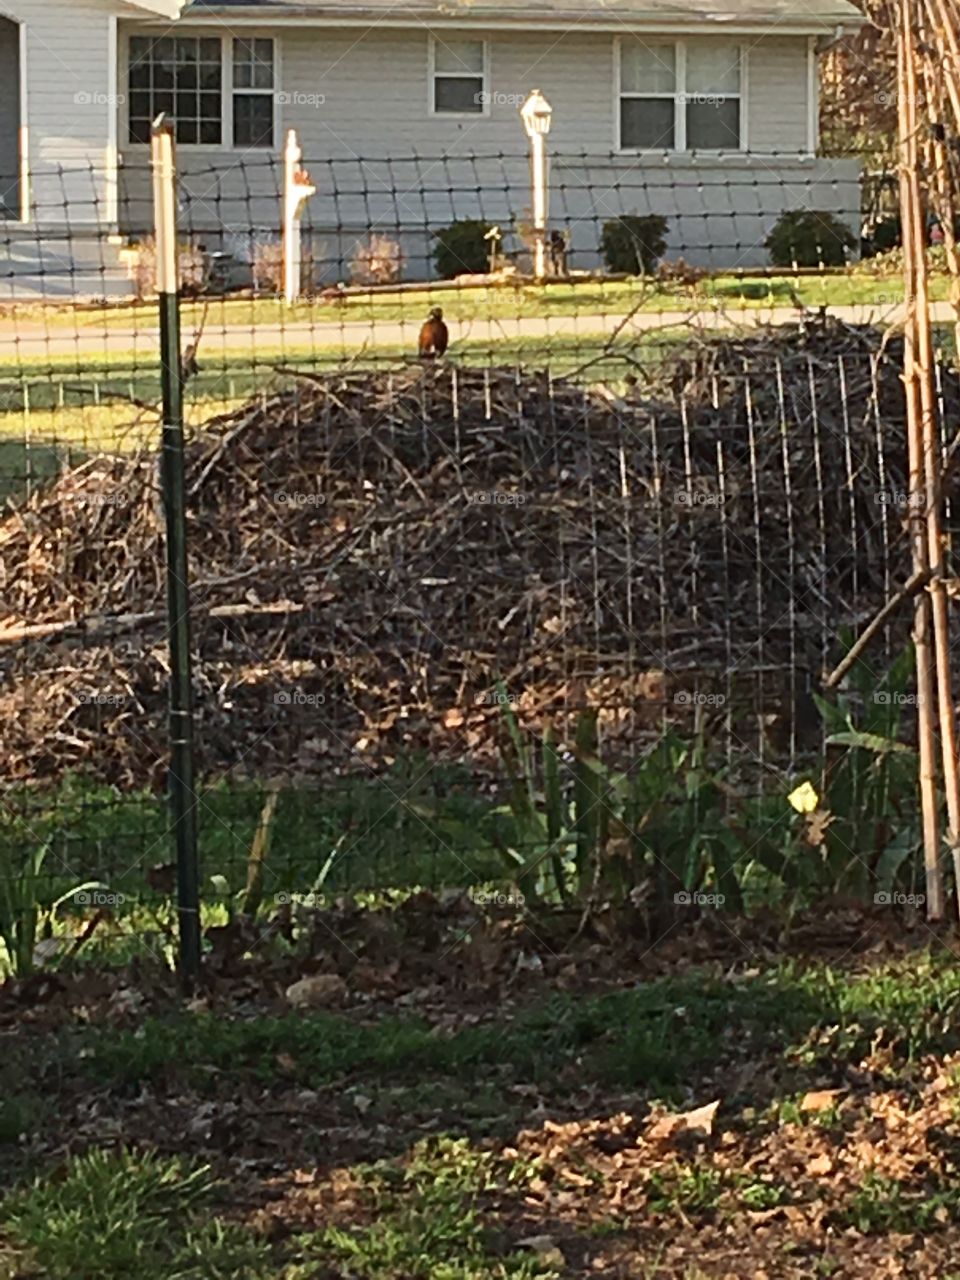 A robin sitting on a big mulch pile just sitting looking and looking waiting .